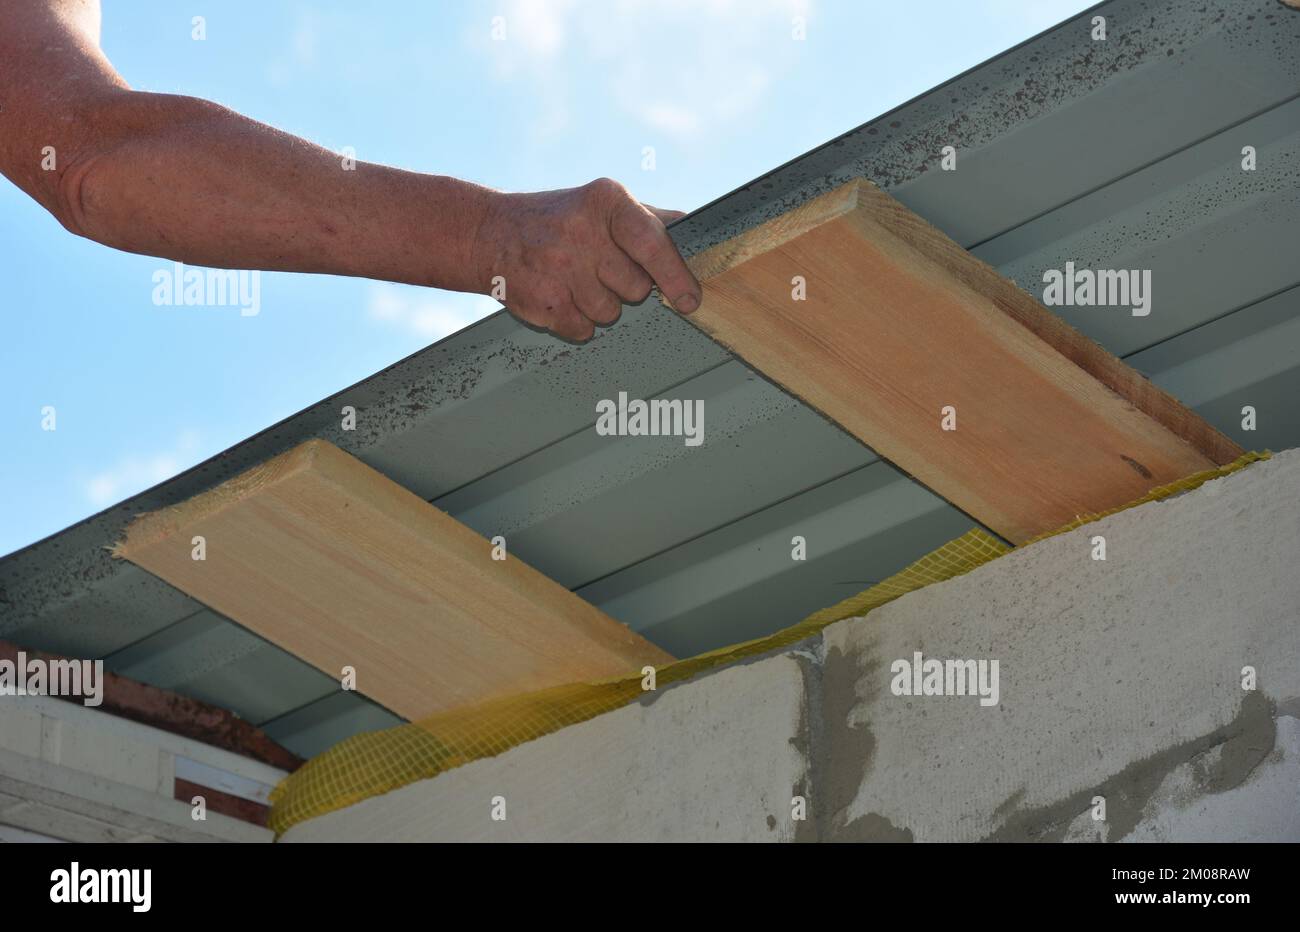 Roofer installing lightweight metal roofing sheets on new house rooftop. Lightweight metal roofing construction. Stock Photo